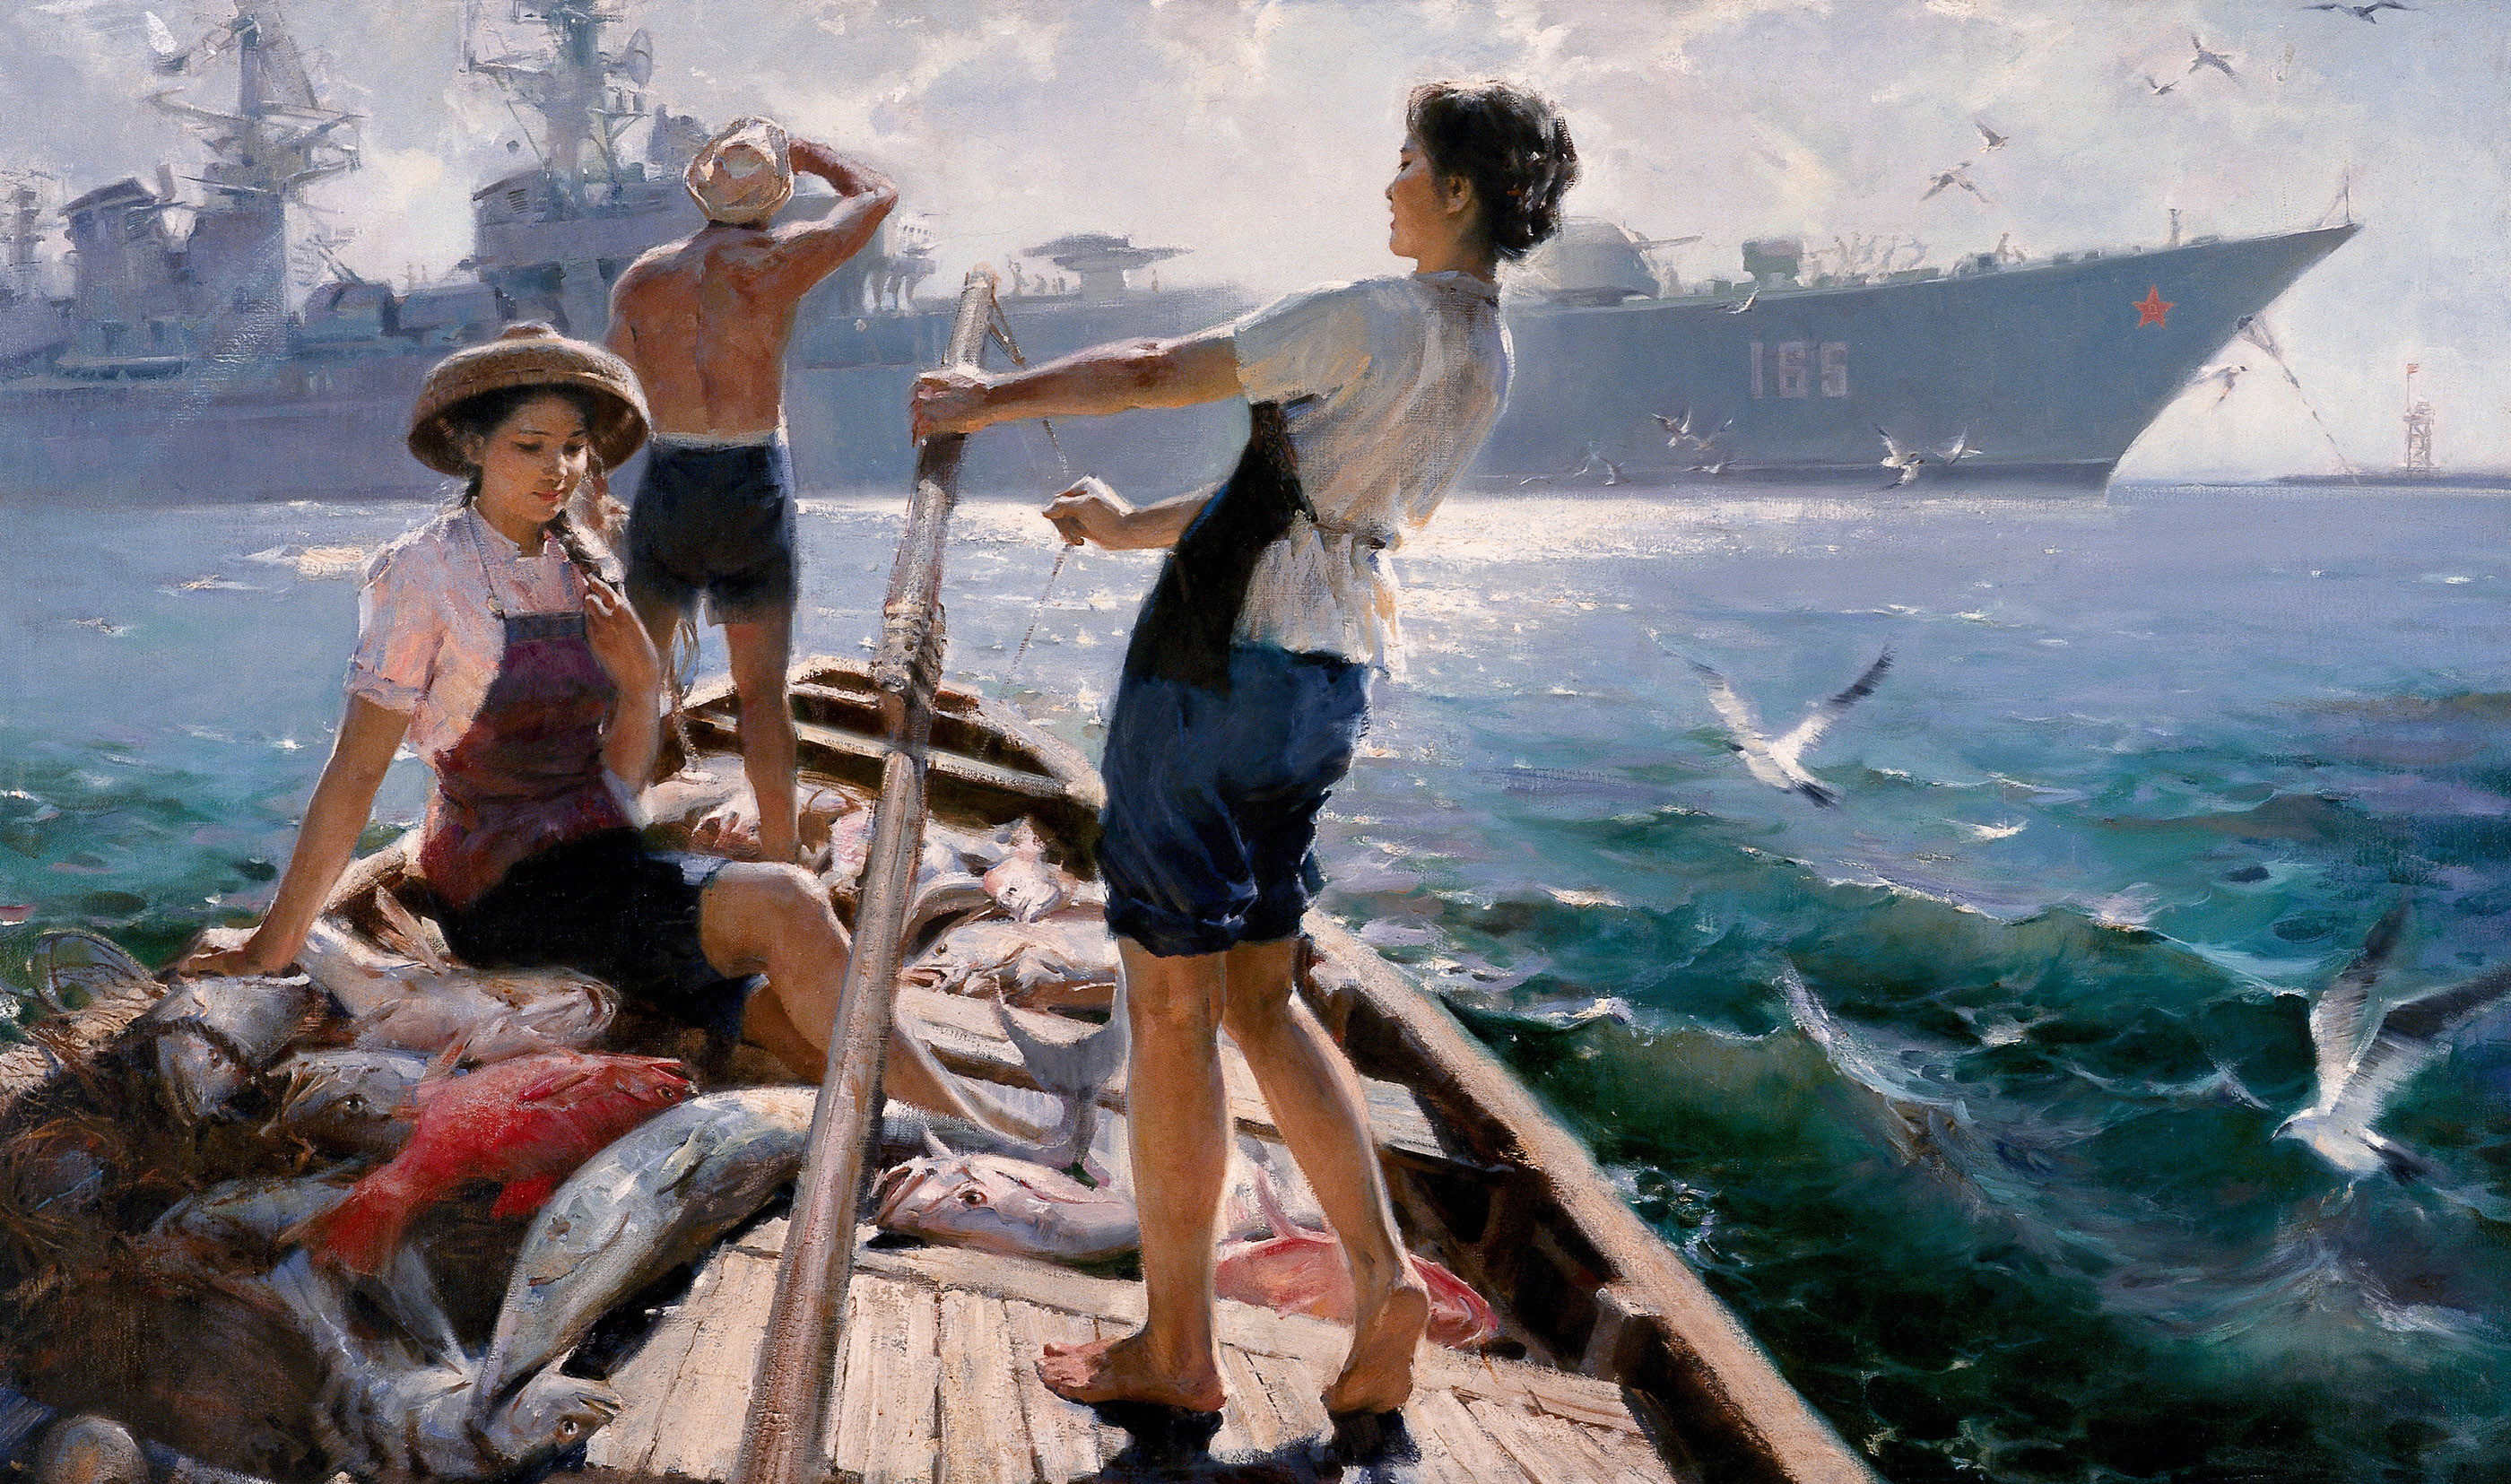 Painting A Morning In Xisha HE An Destroyer Fishing Boat 2800x1655